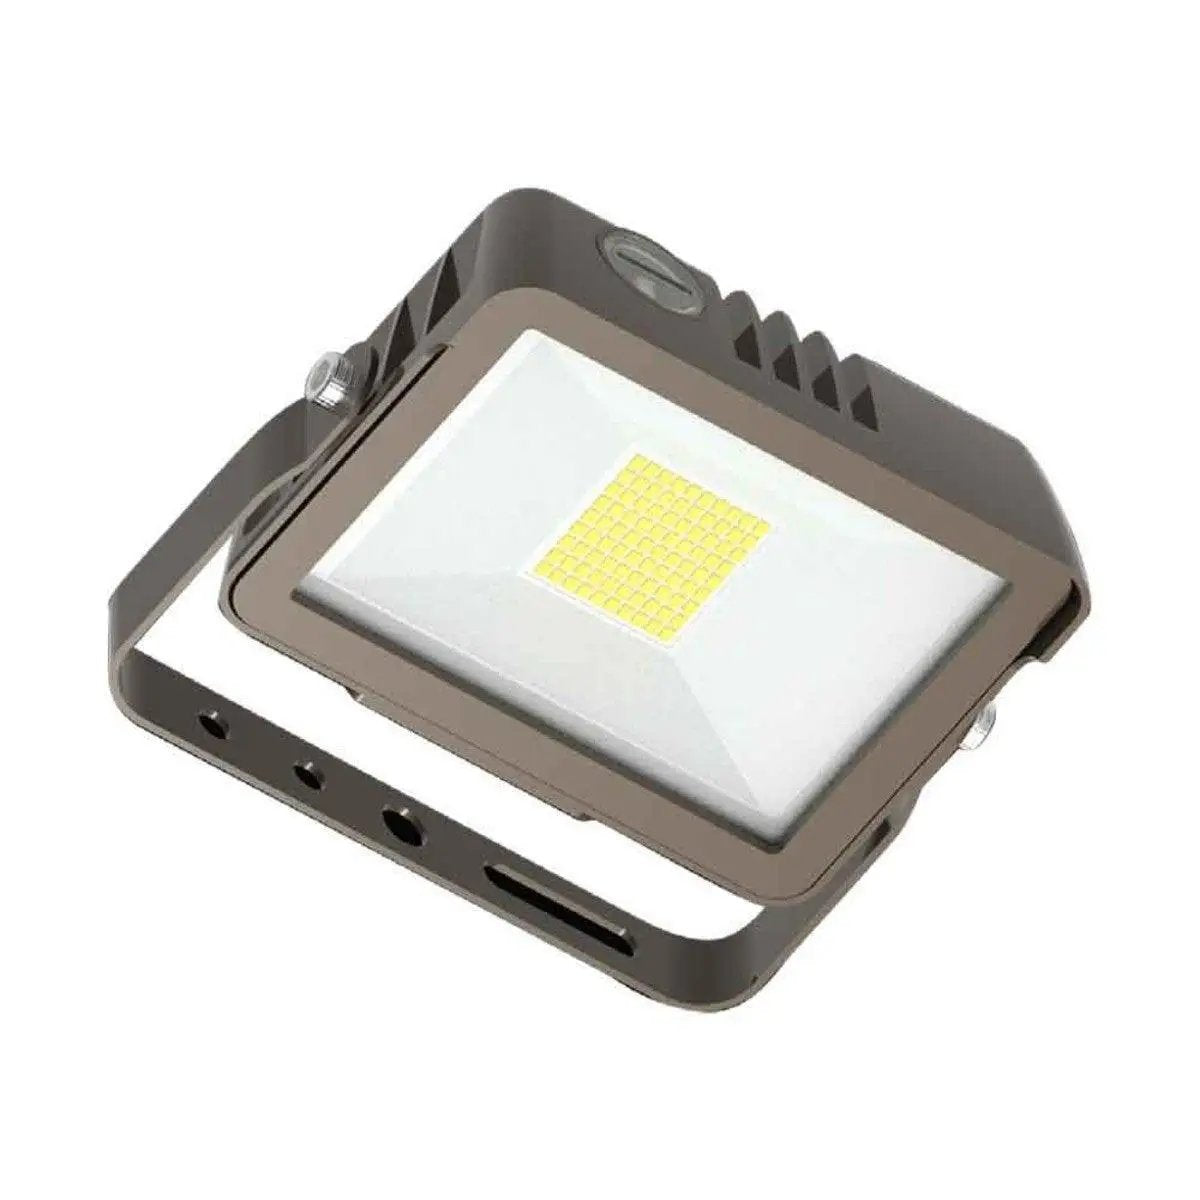 Outdoor Flood Lighting Fixture with color adjustable white light, universal mounting options, and built-in photocell for energy savings.